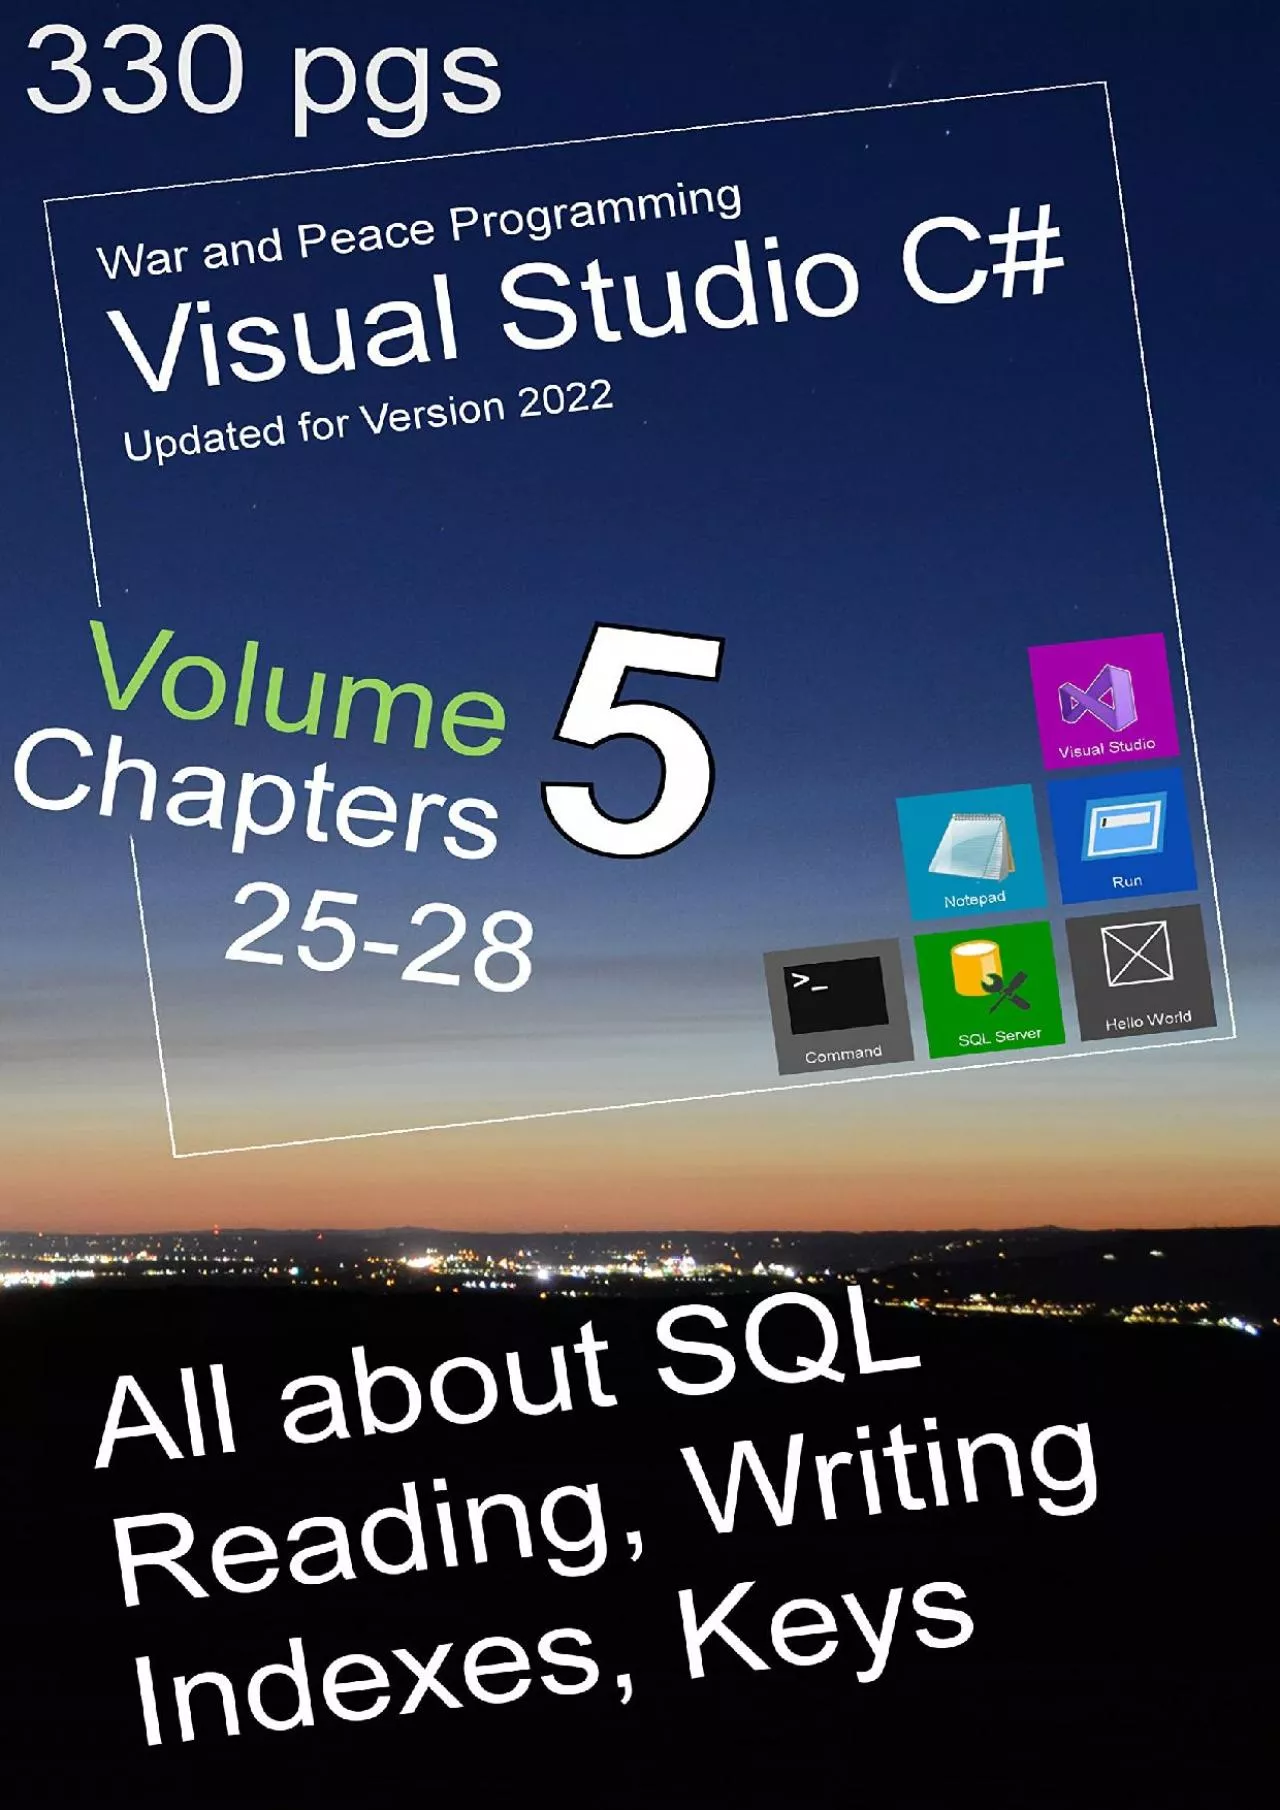 [FREE]-War and Peace - C Programming 5 Vol.: Programming in C Visual Studio - All about